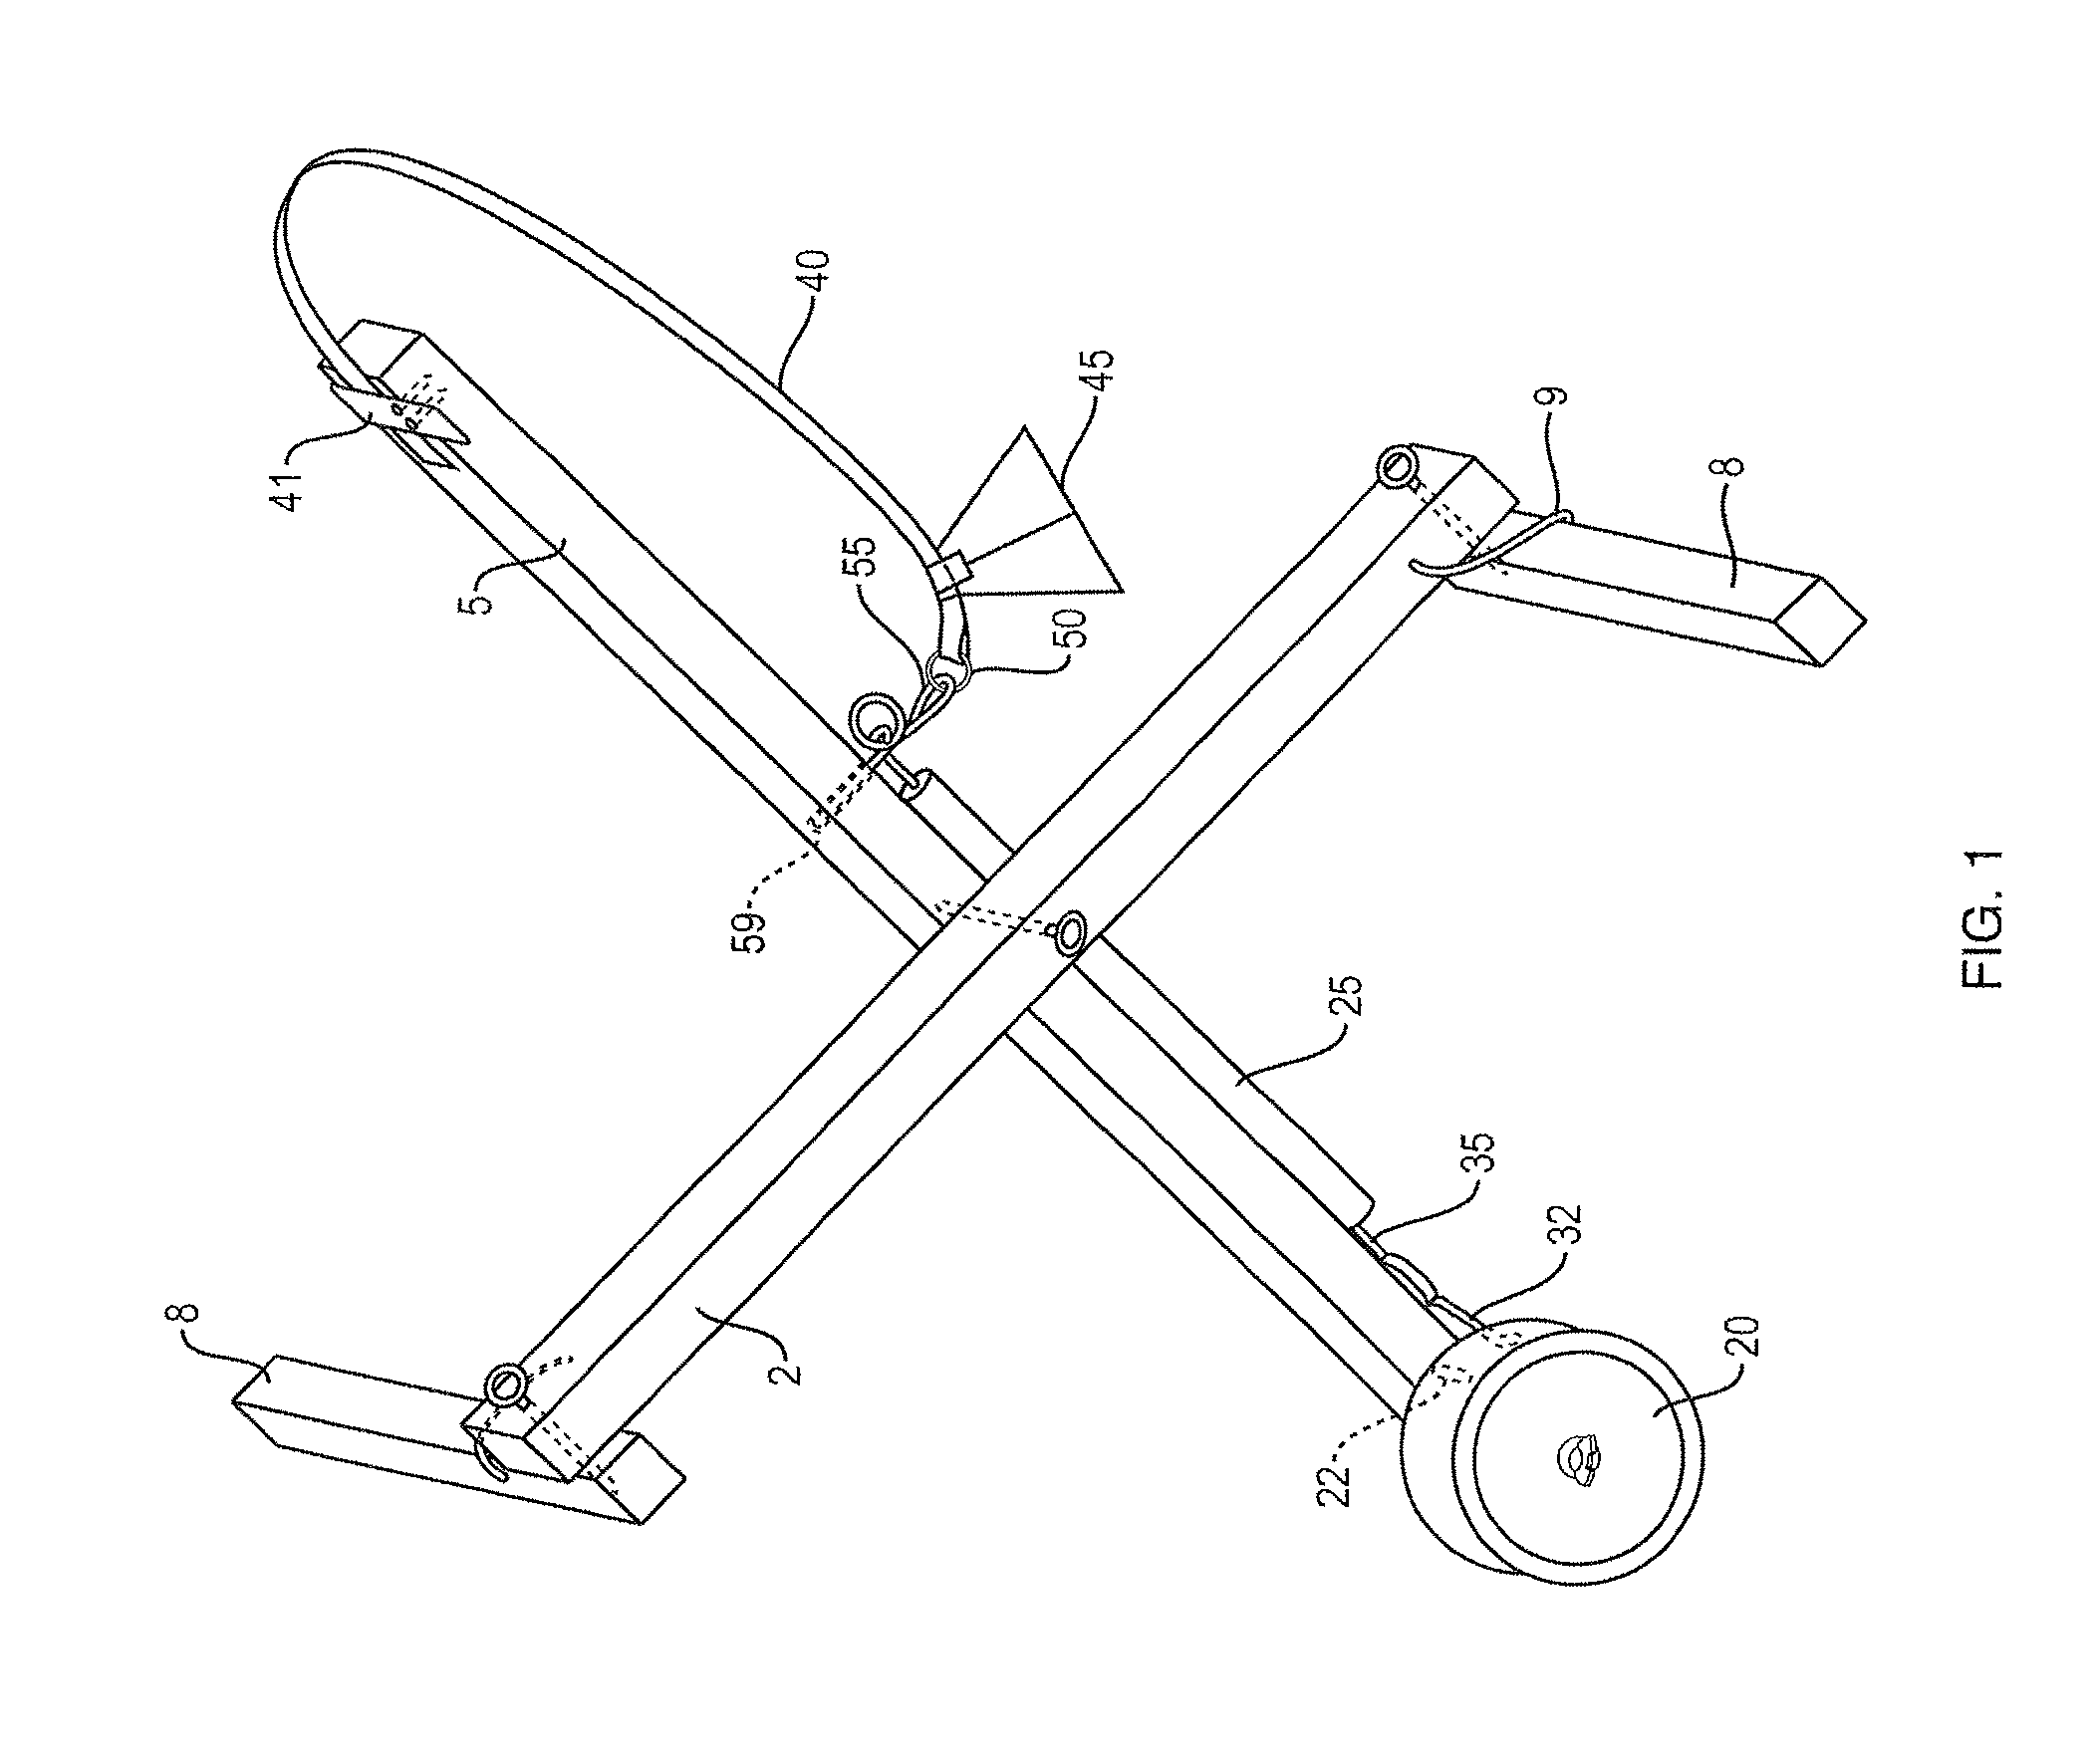 Apparatus for controlling the release of a tip-up signal indicator for a trap